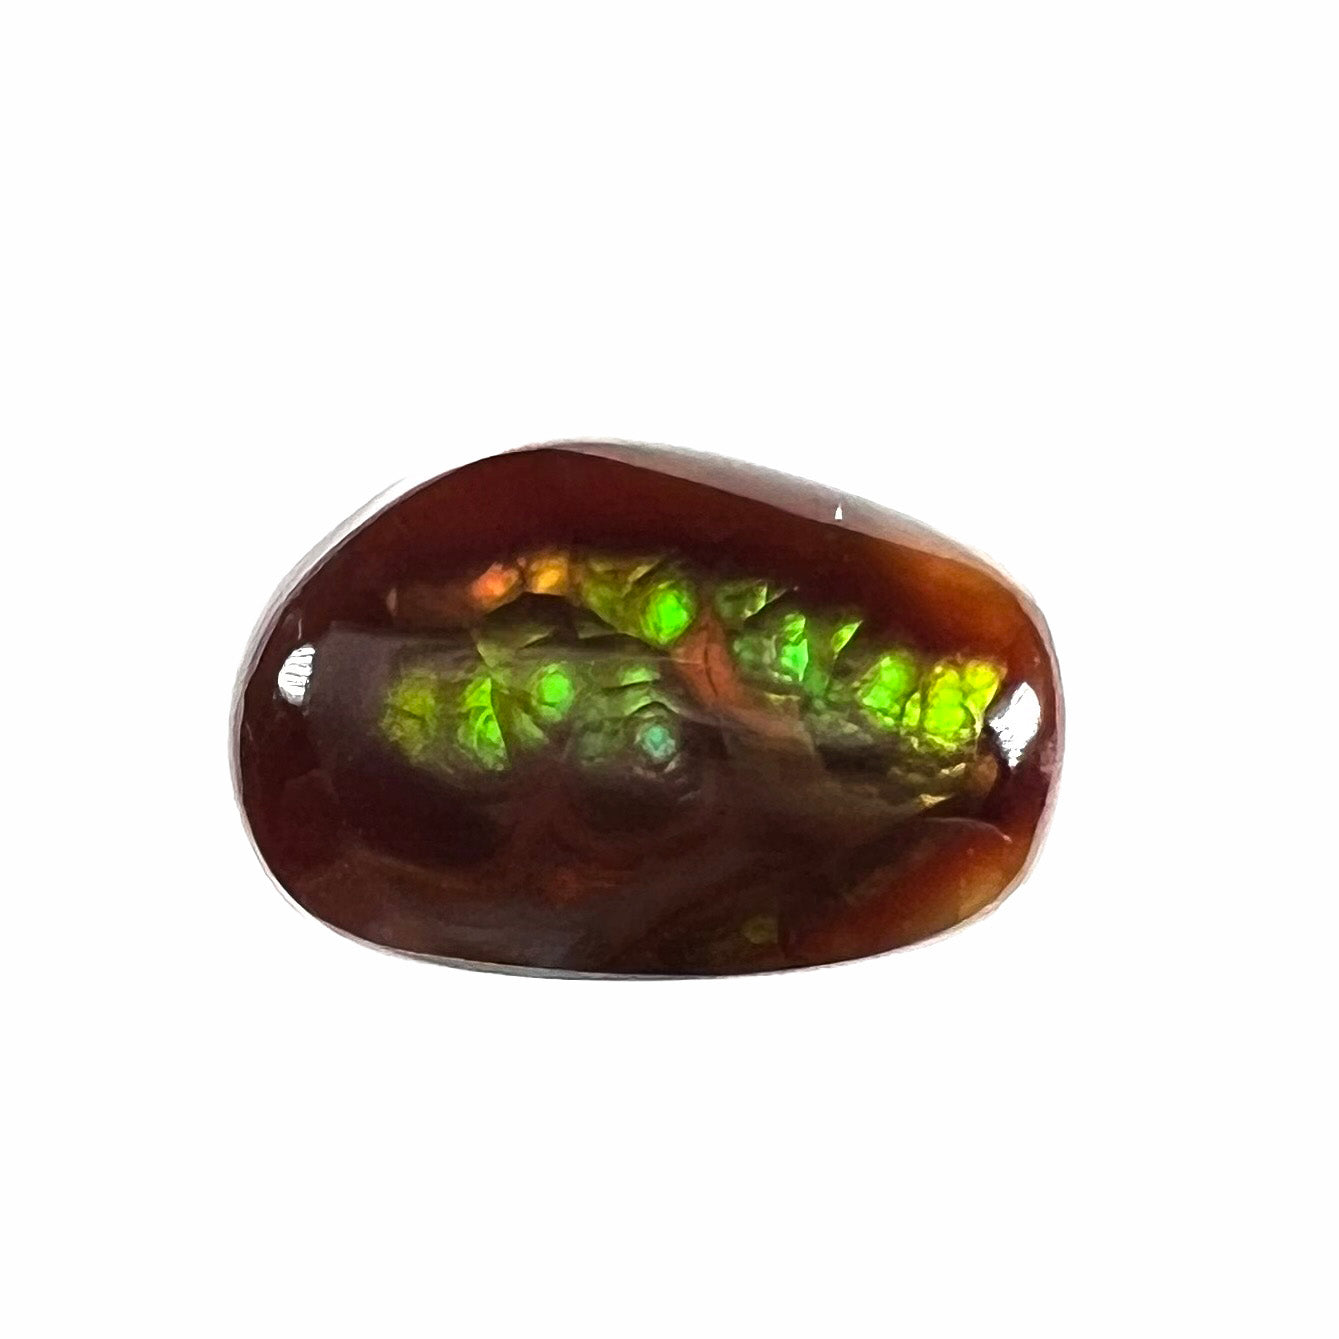 A loose, freeform cabochon cut fire agate gemstone.  The stone is green with blue overtones.